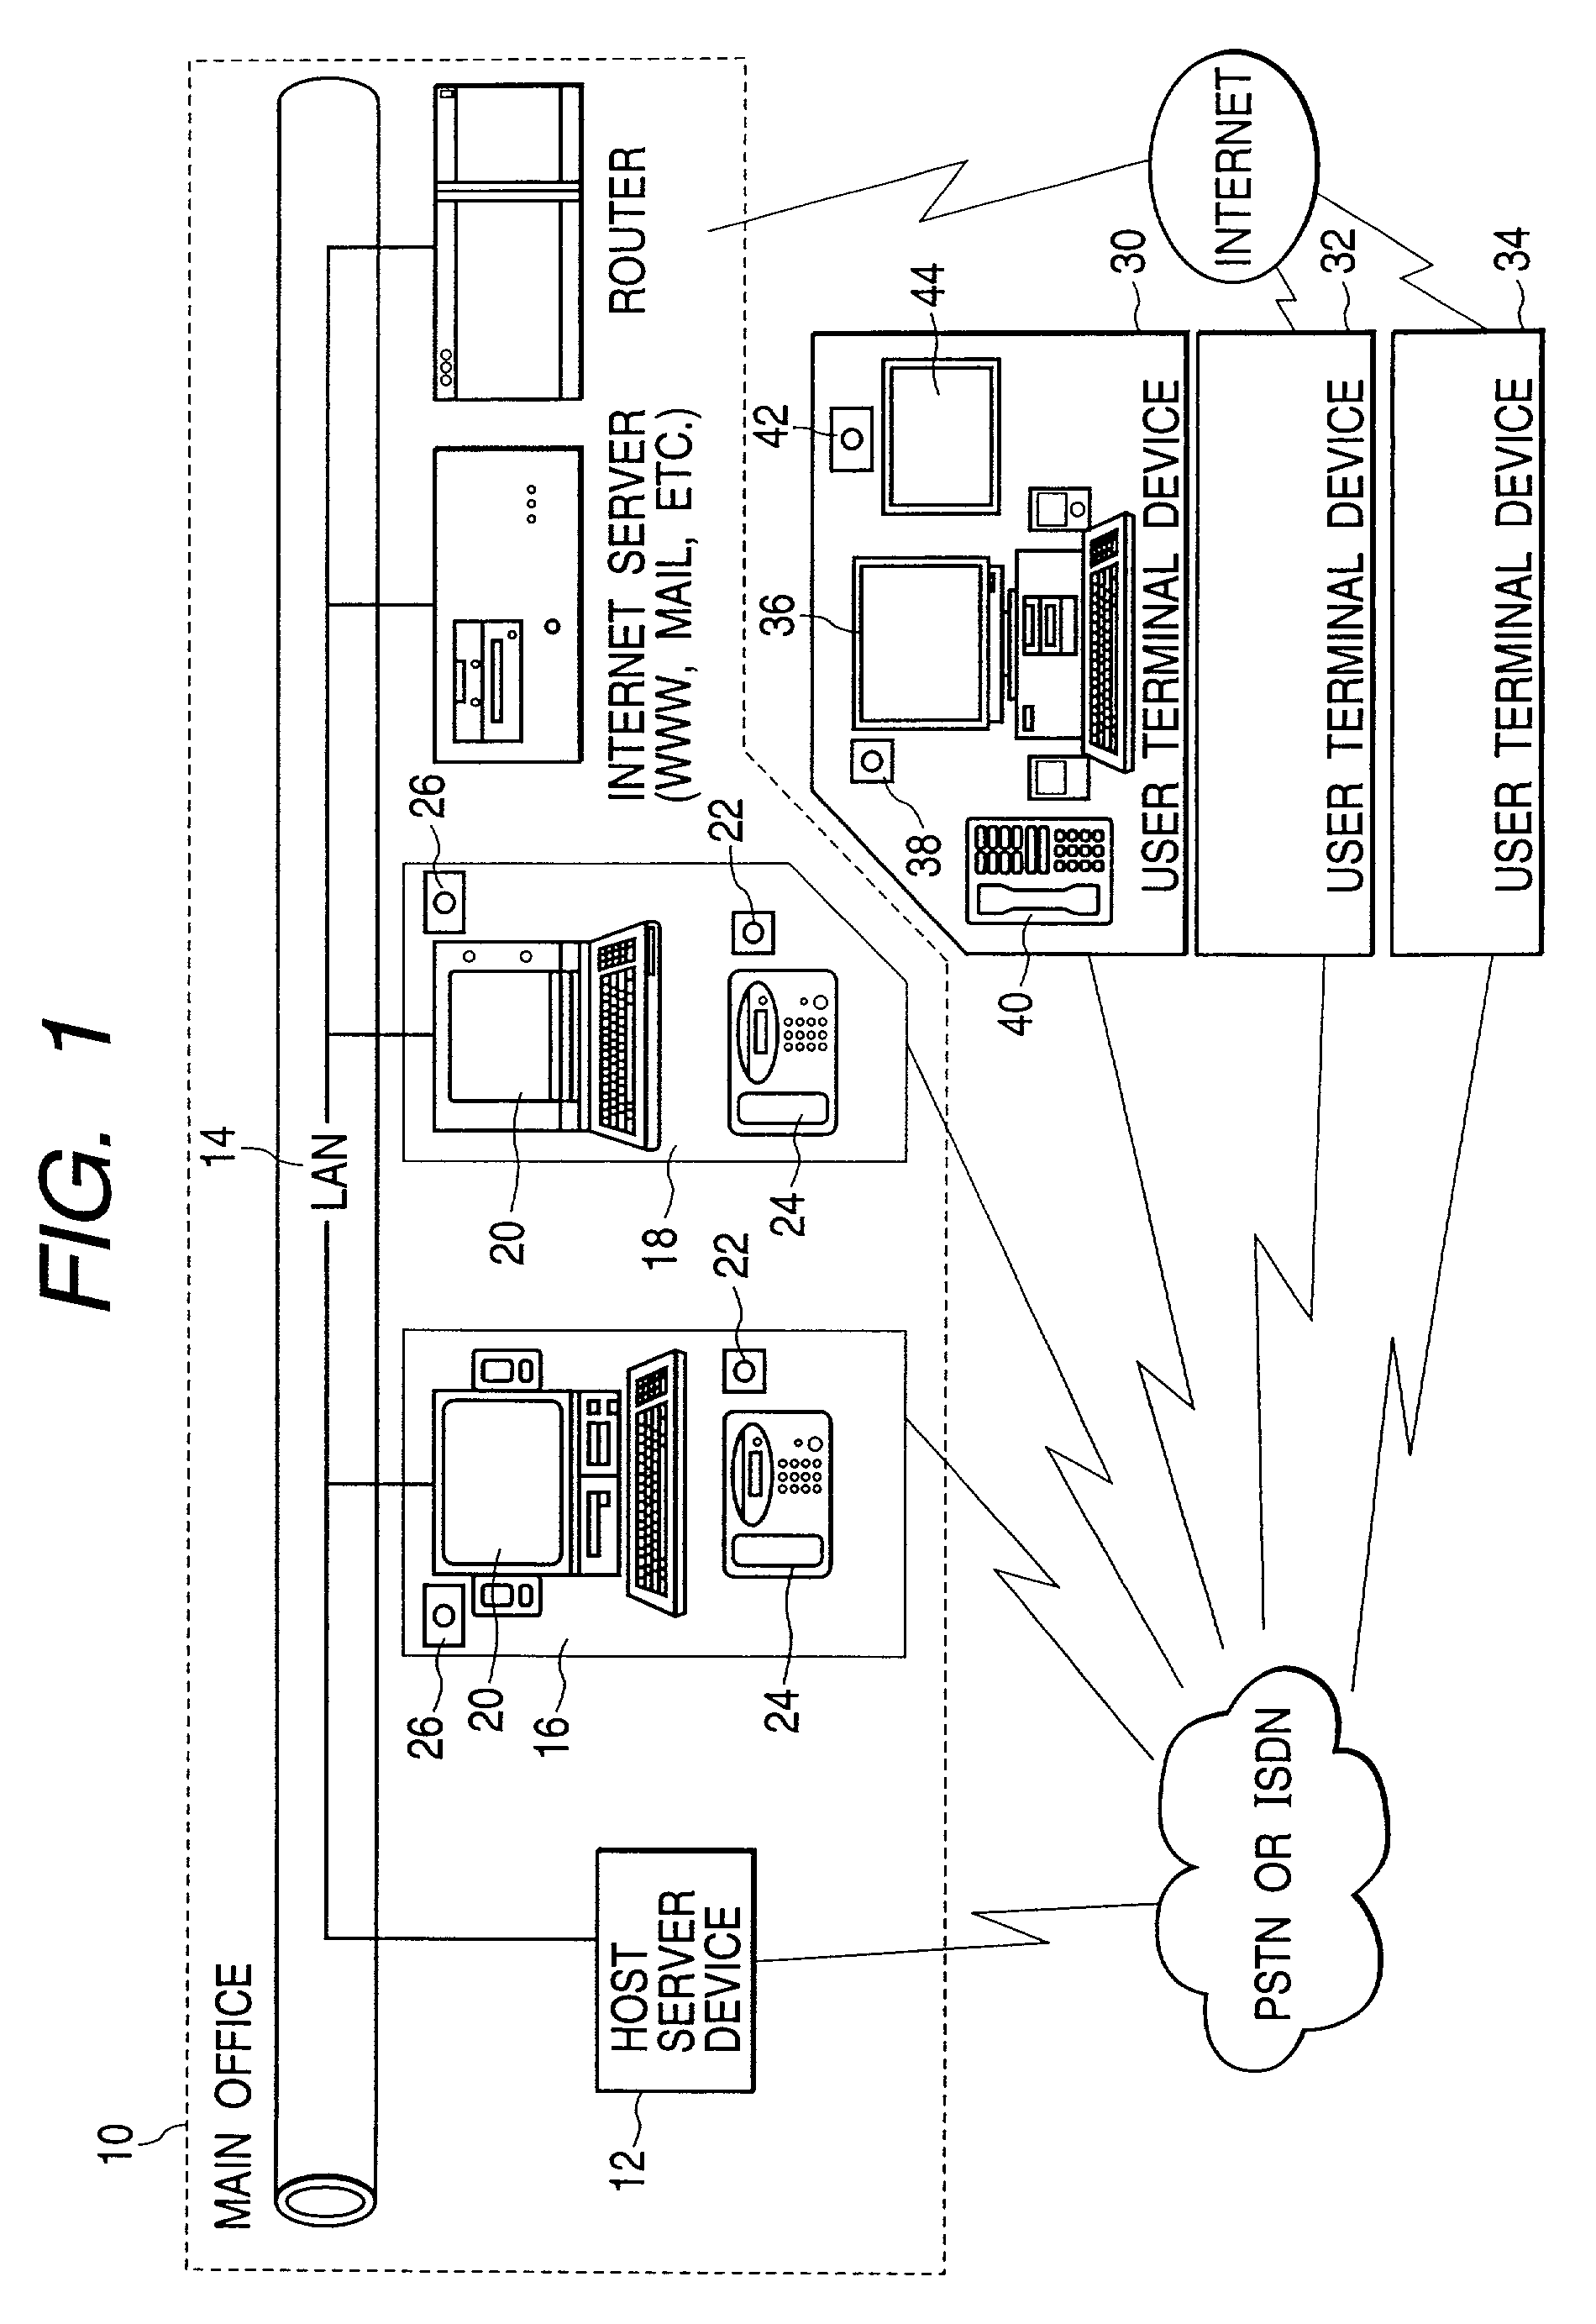 Control apparatus of virtual common space using communication line